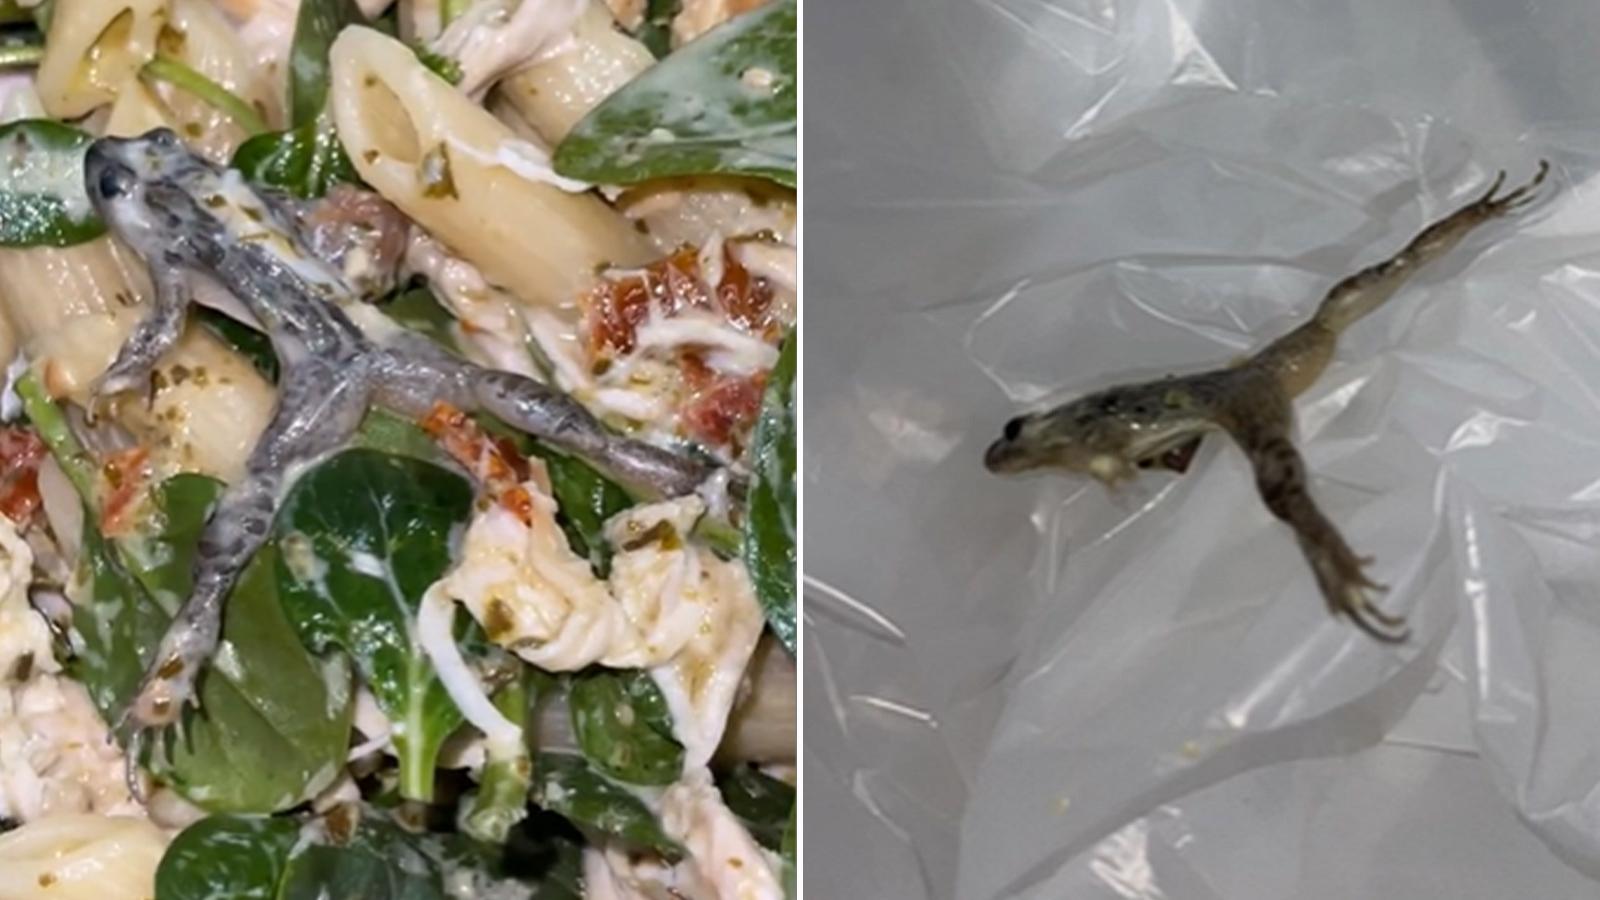 Woman finds frog in salad, keeps it as pet